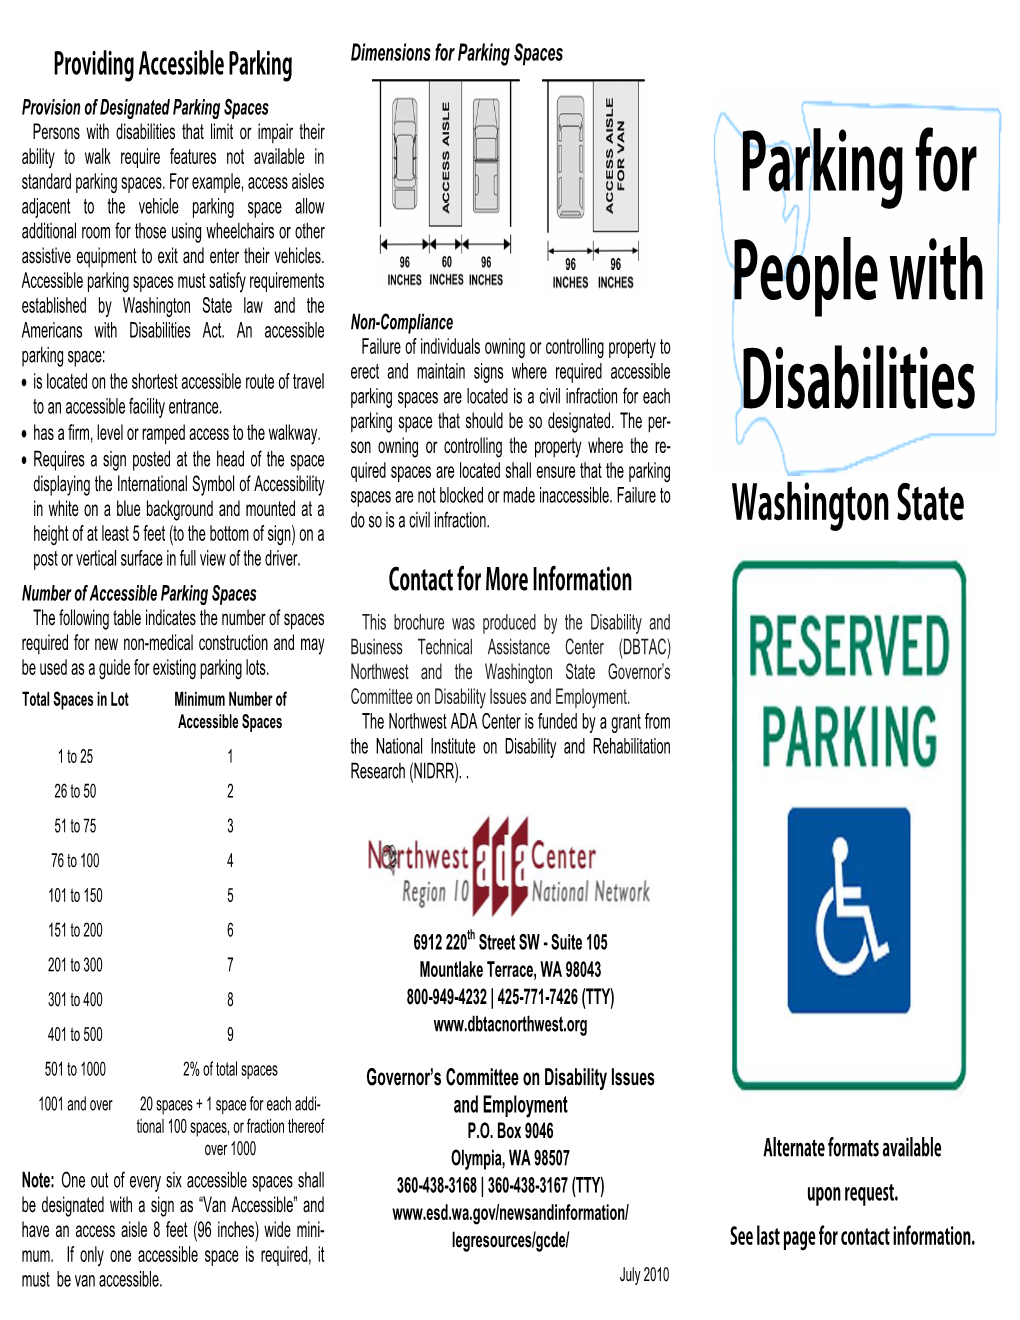 Parking for People with Disabilities